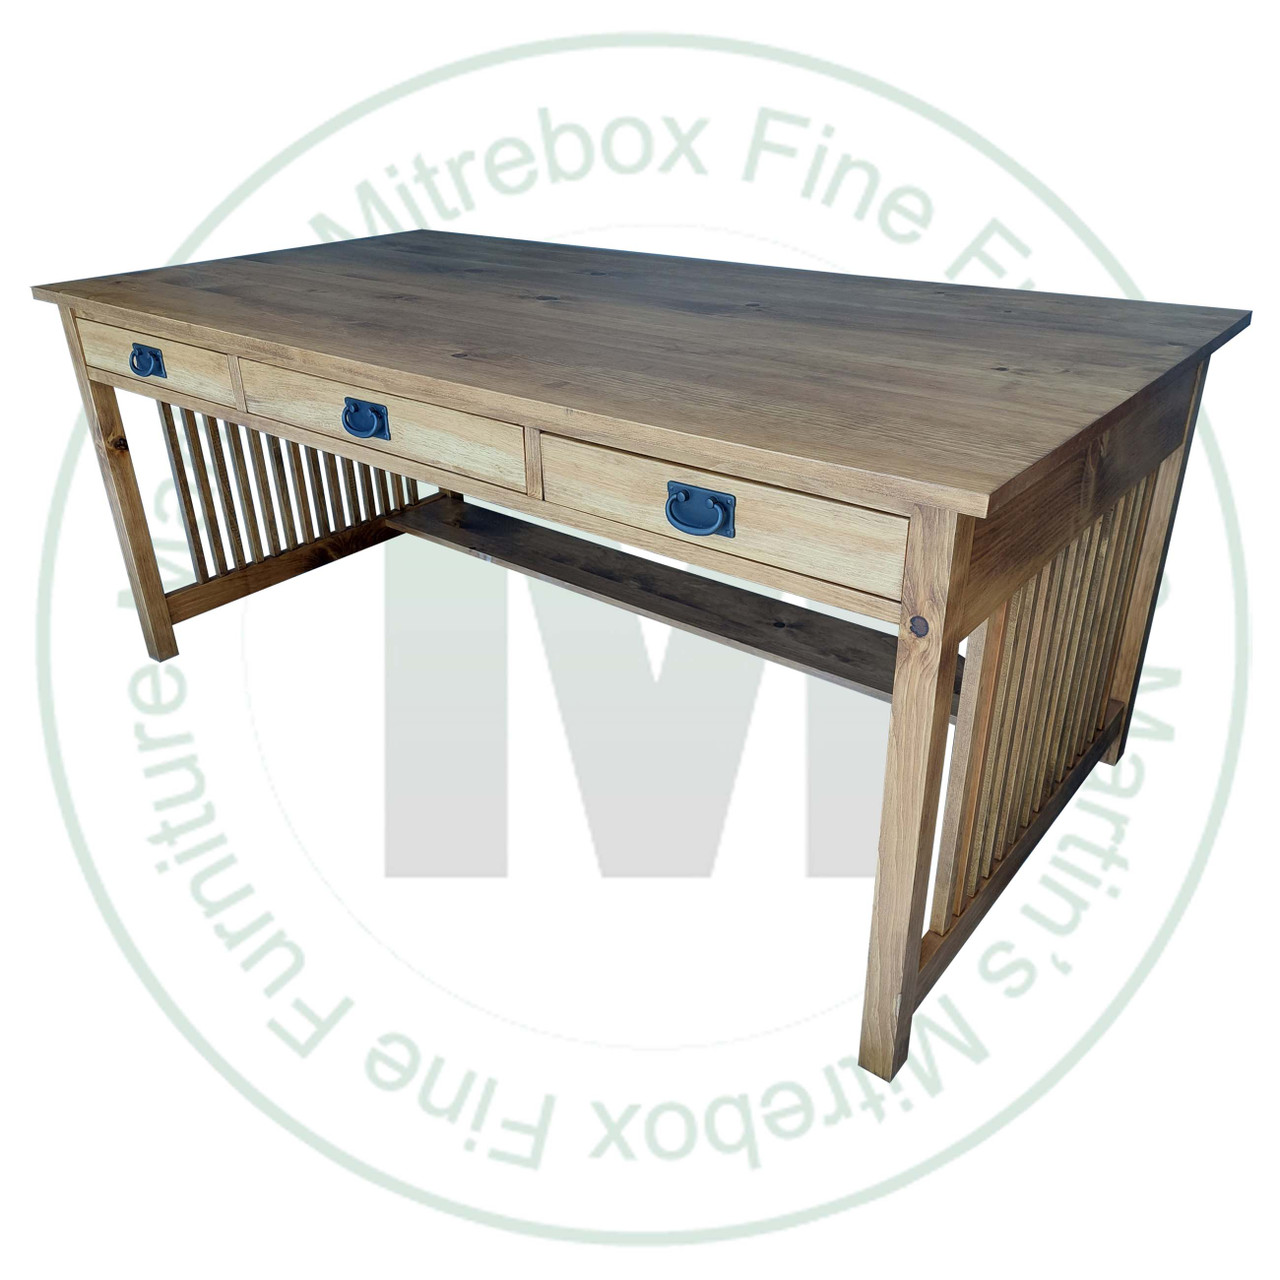 Maple Mission Craftsman Desk 70''W x 30''H x 36''D With 2 Drawers and Keyboard Tray.